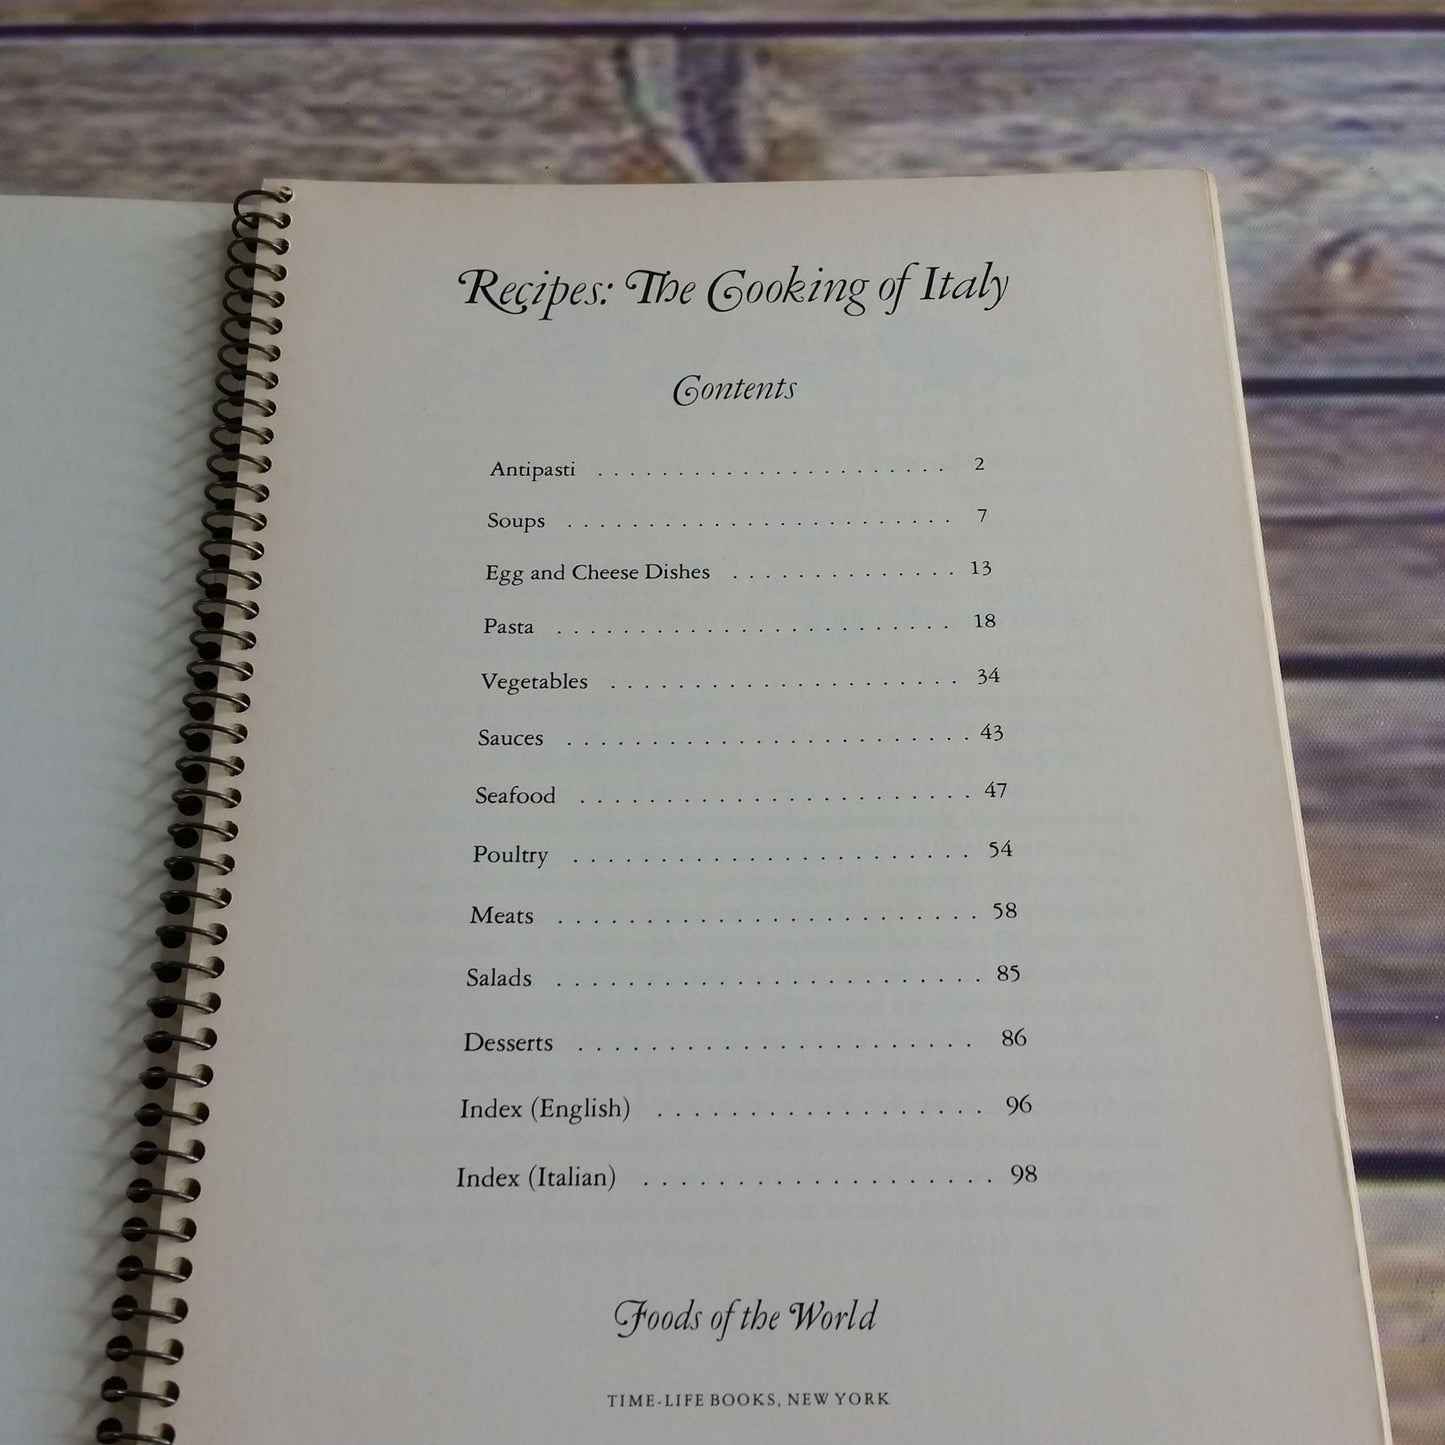 Vintage Cookbook Italian Cooking Recipes Time Life Books Foods of the World 1968 Spiral Bound The Cooking of Italy